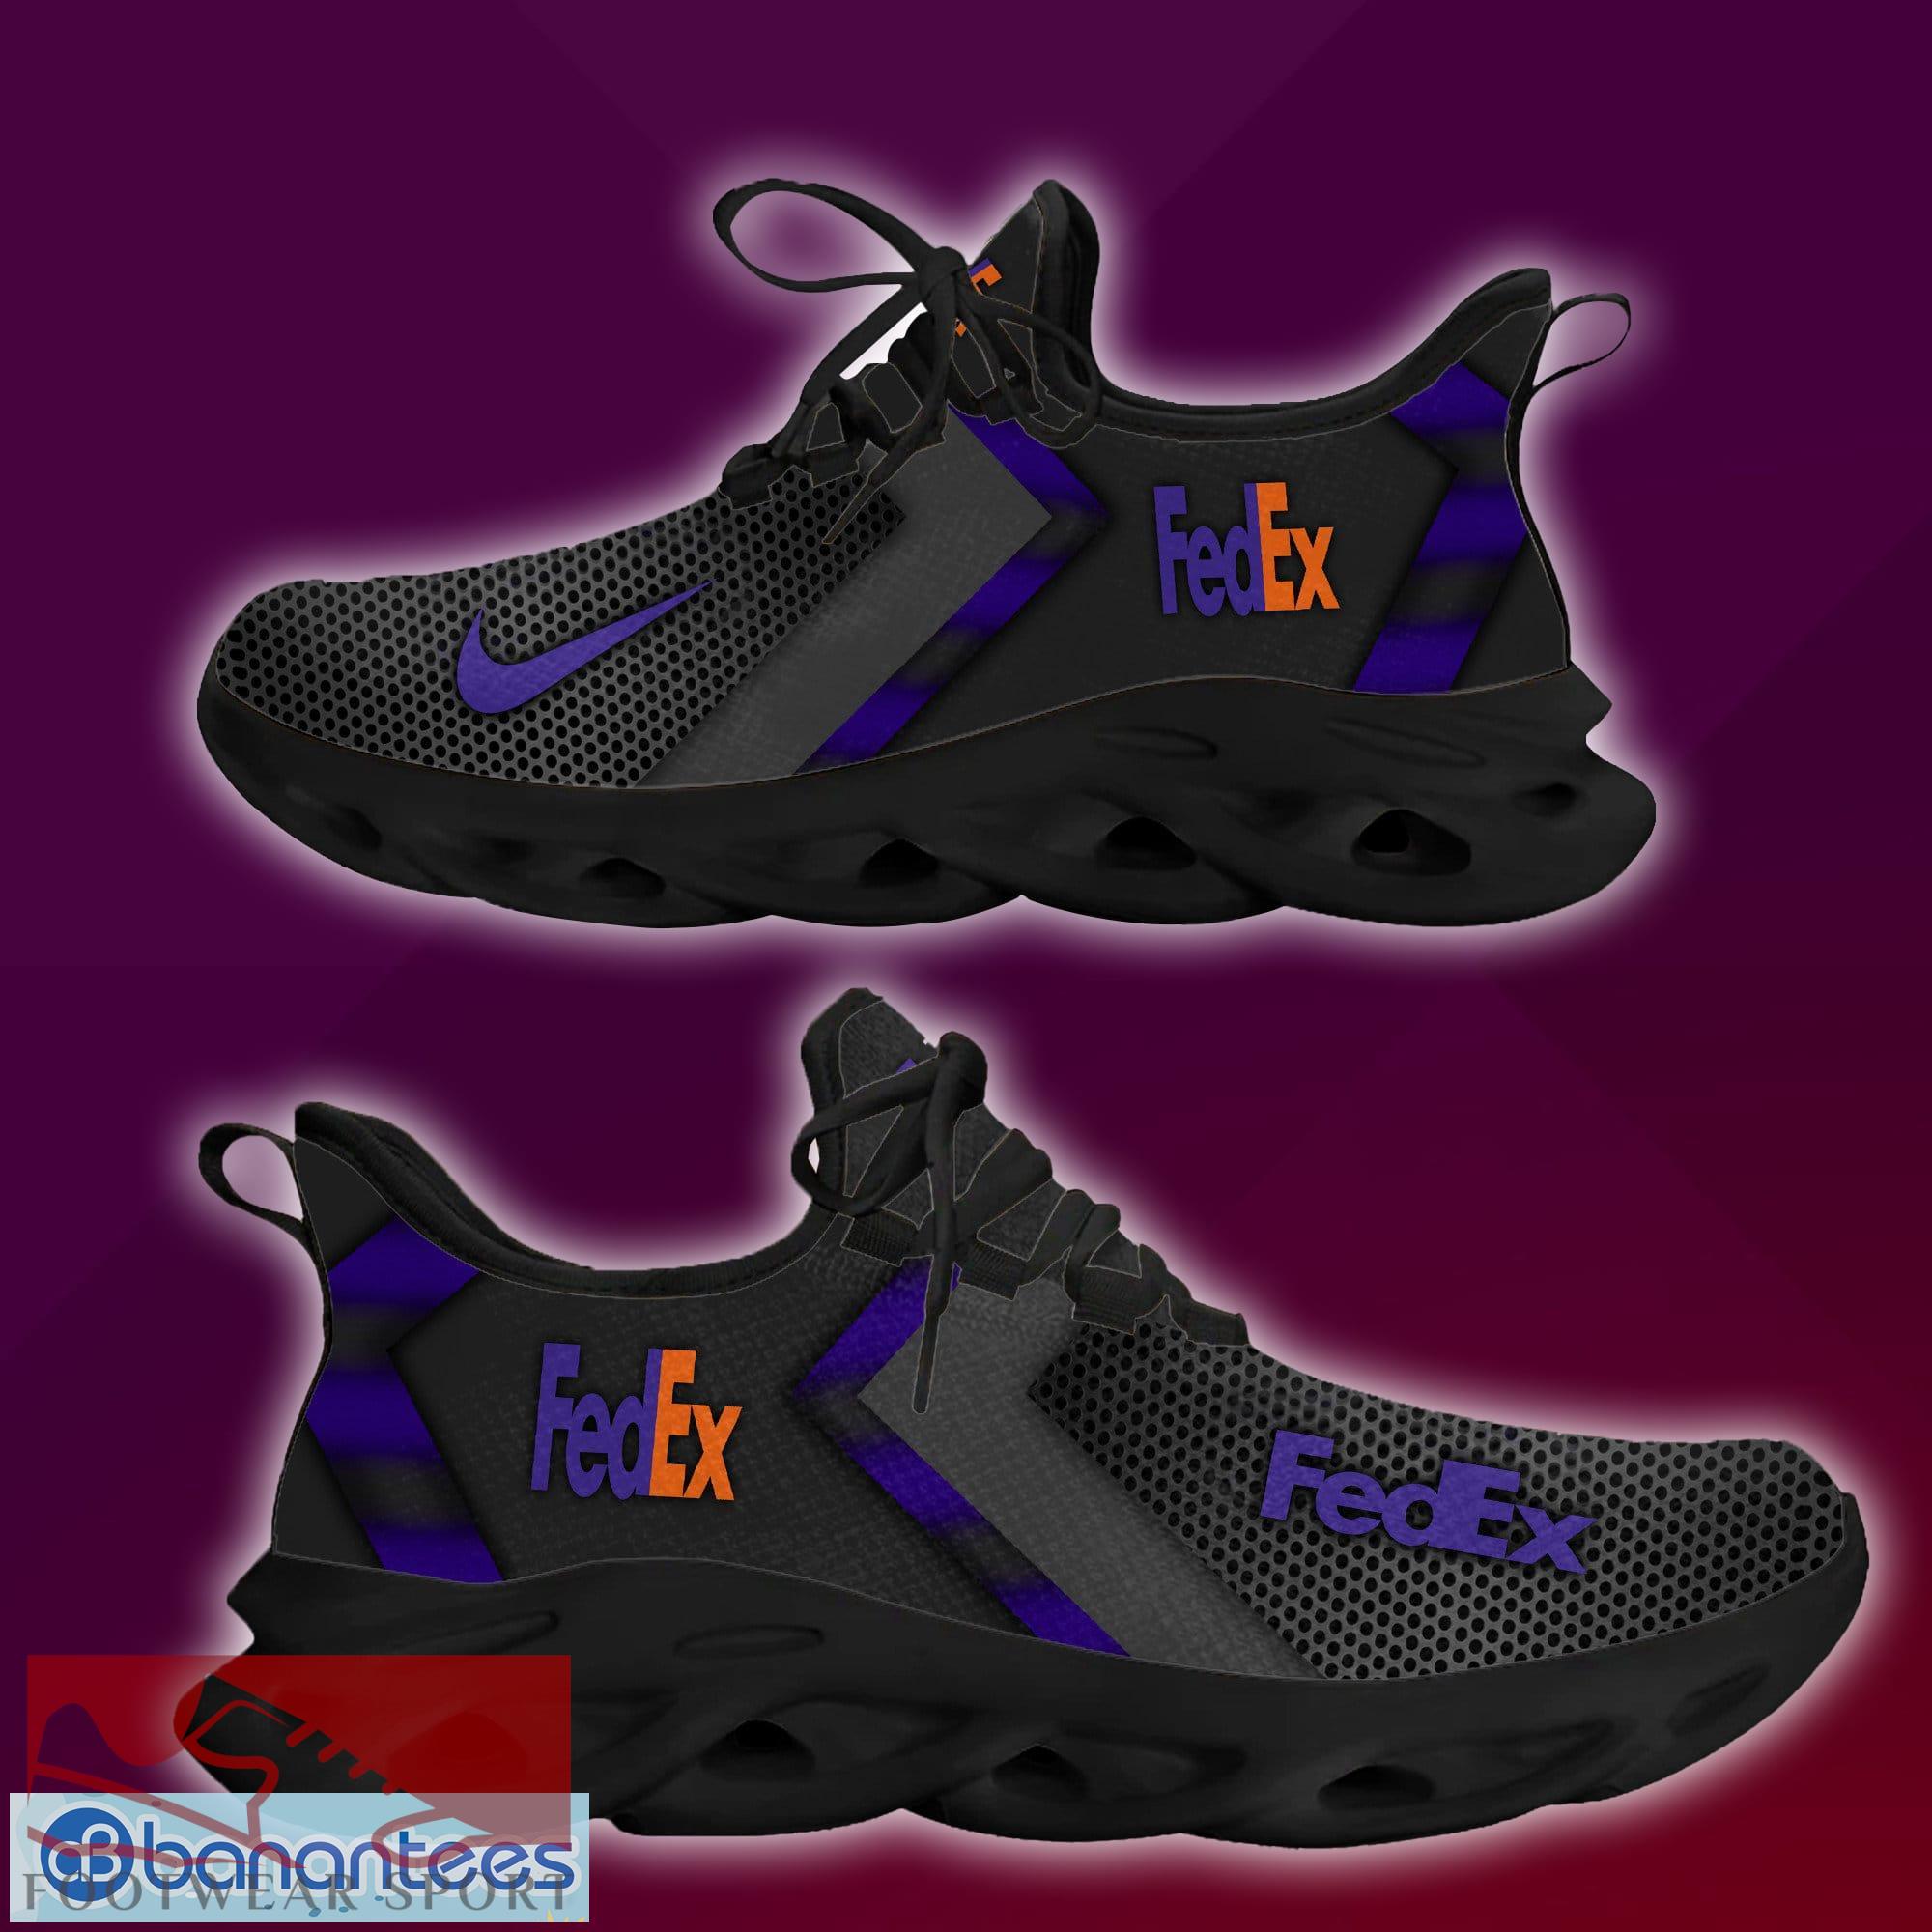 fedex Brand New Logo Max Soul Sneakers Fusion Running Shoes Gift - fedex New Brand Chunky Shoes Style Max Soul Sneakers Photo 1